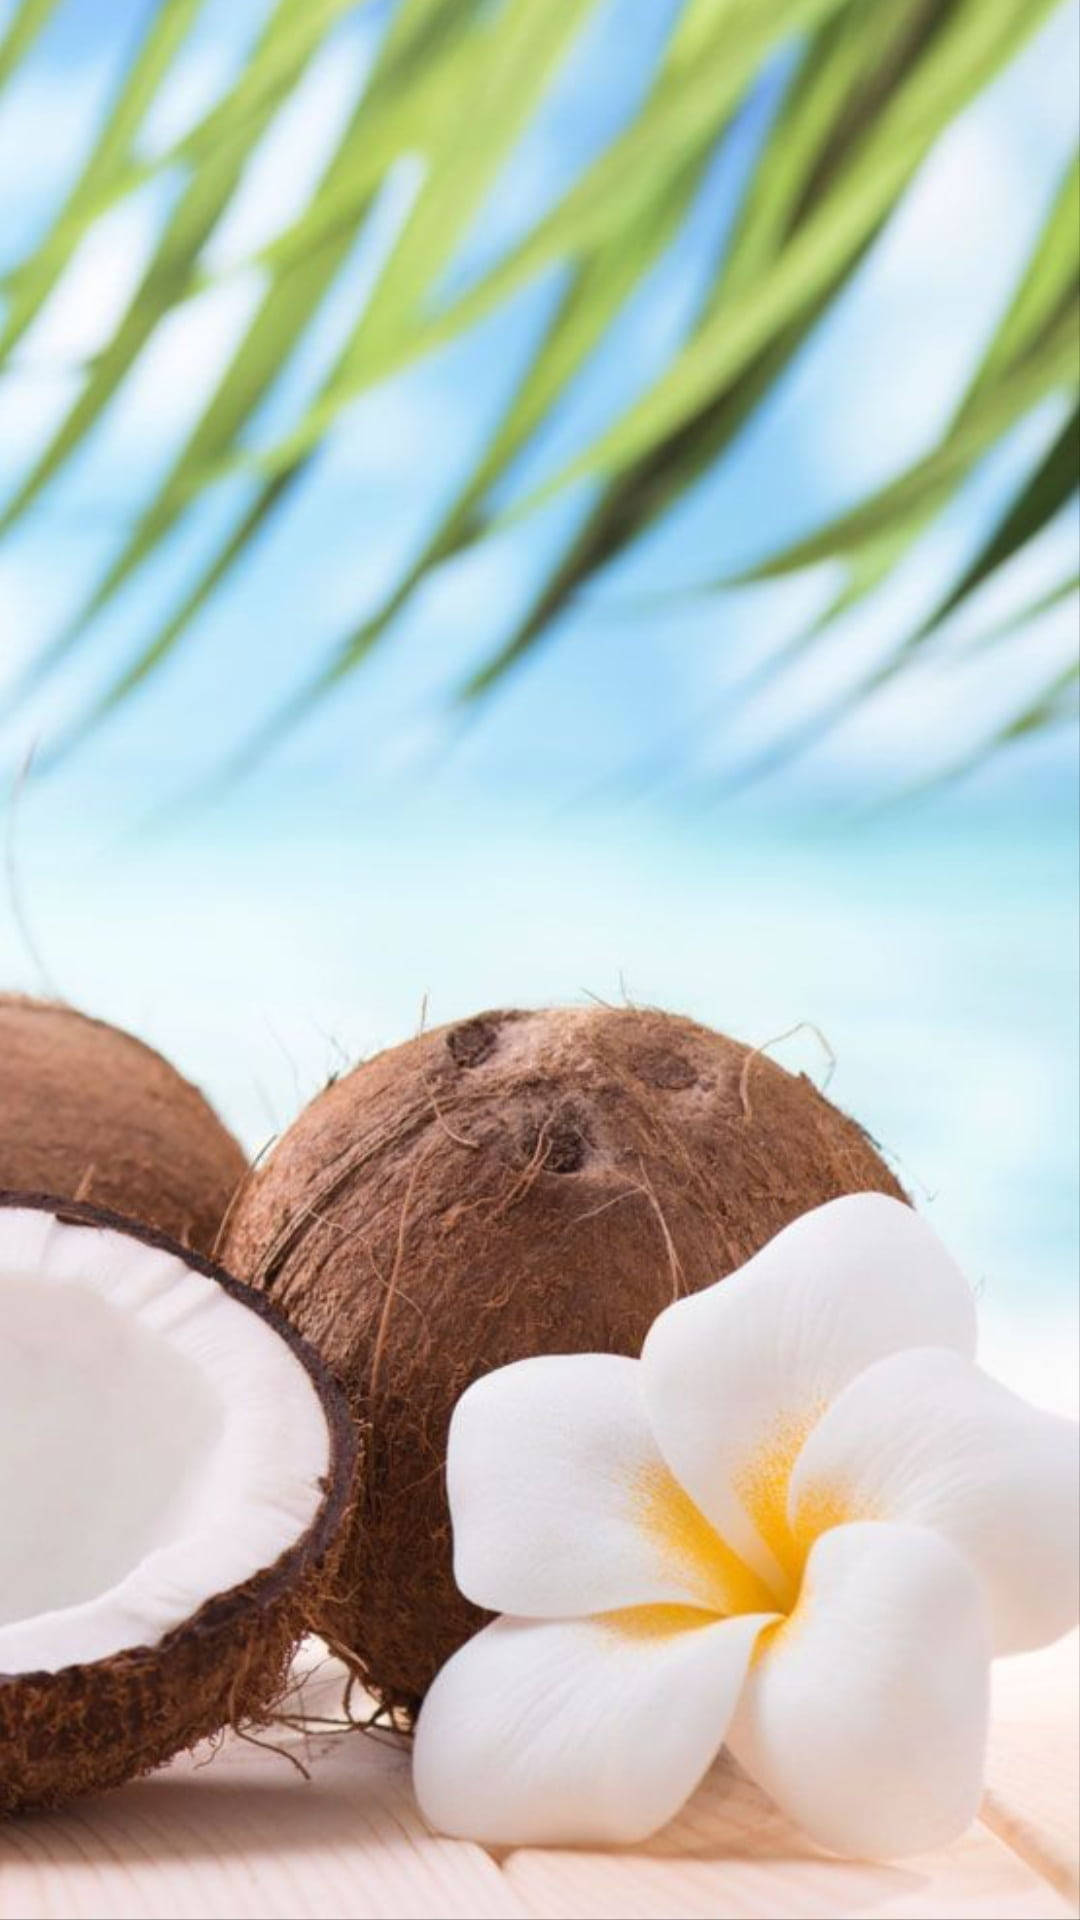 Download Coconut Fruits With White Plumeria Flower Wallpaper | Wallpapers .com